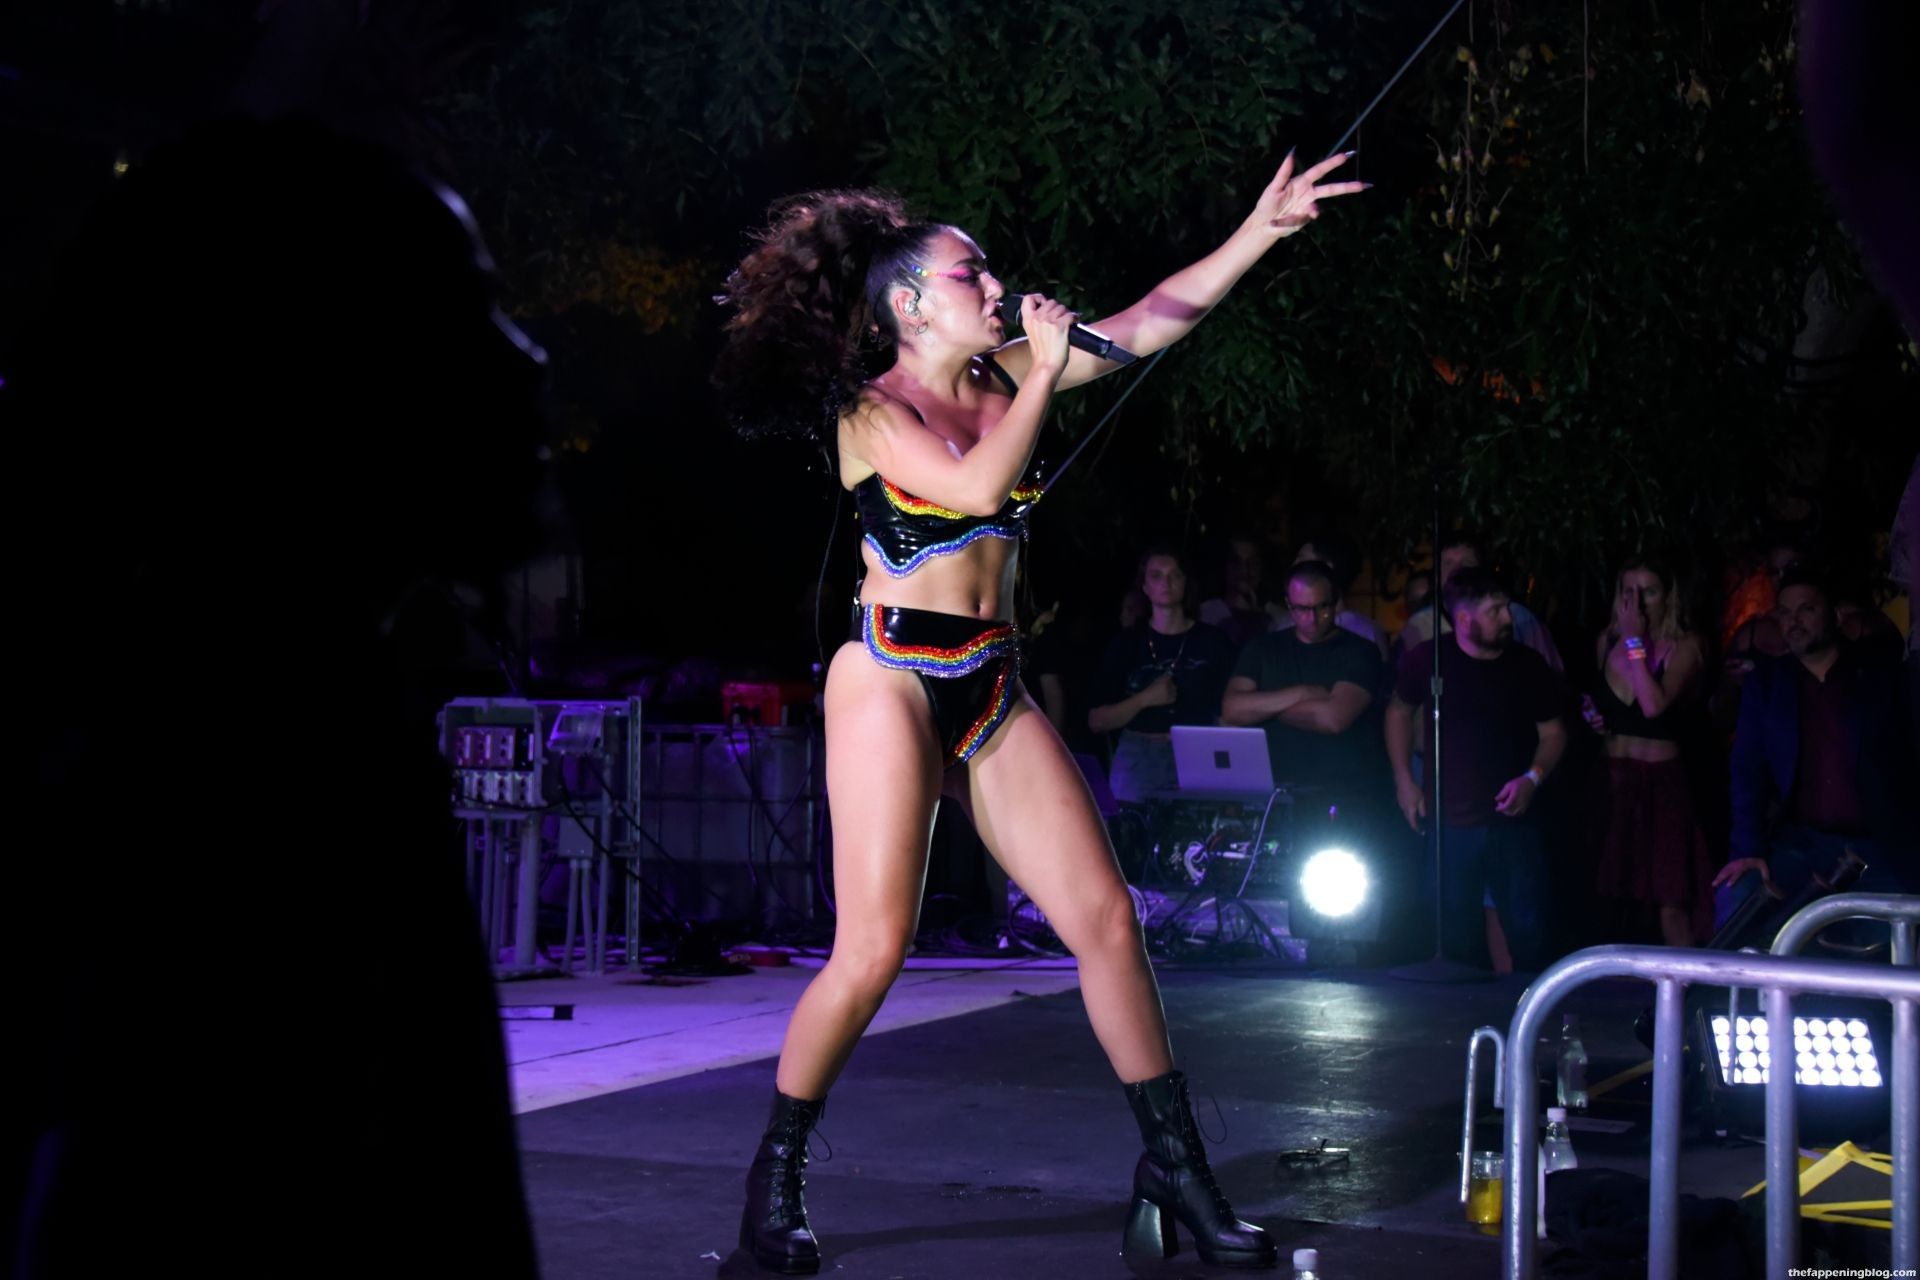 Charli-XCX-Sexy-on-Stage-7-thefappeningblog.com_.jpg